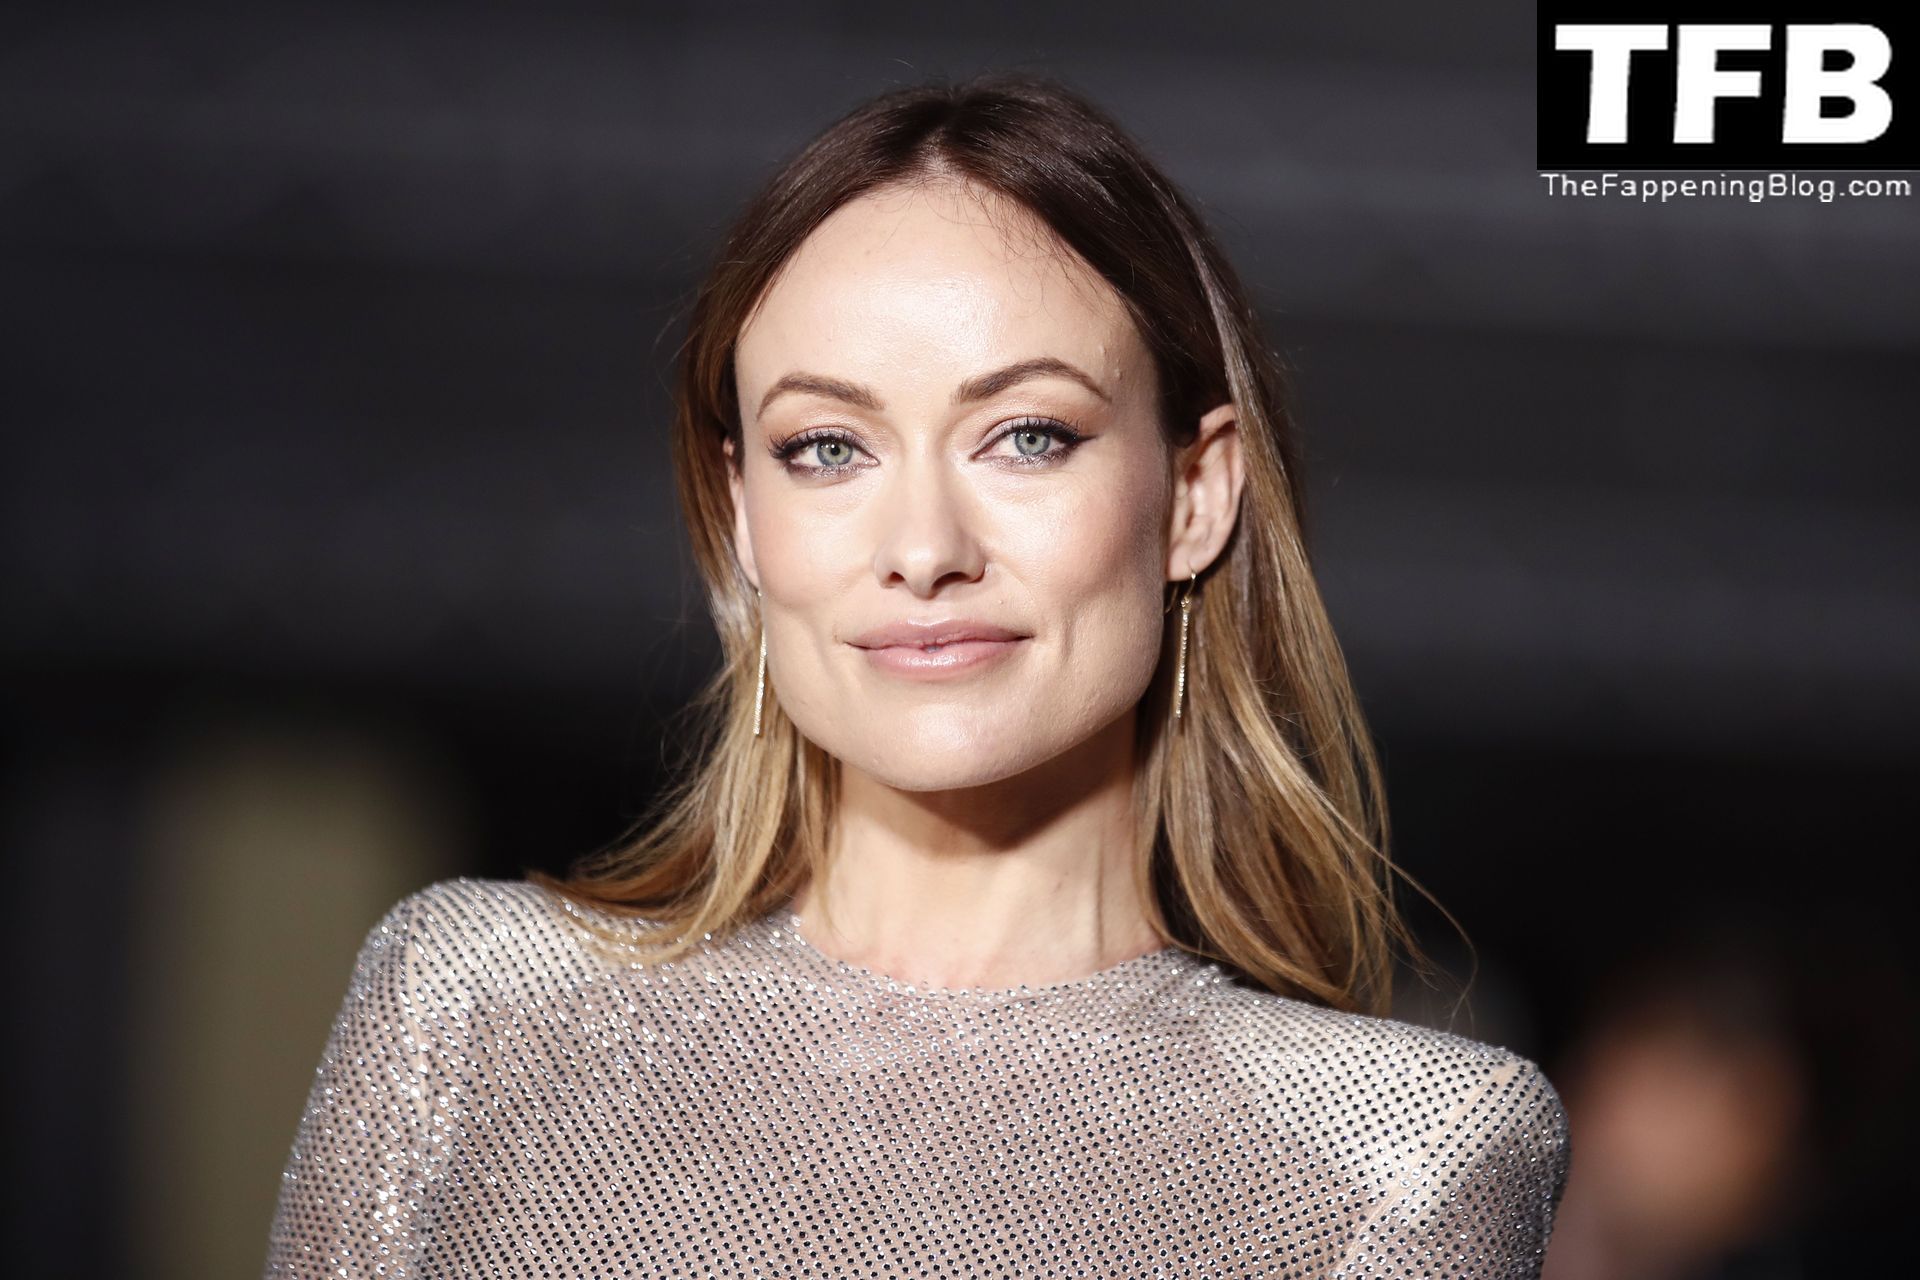 Olivia-Wilde-See-Through-The-Fappening-Blog-52.jpg